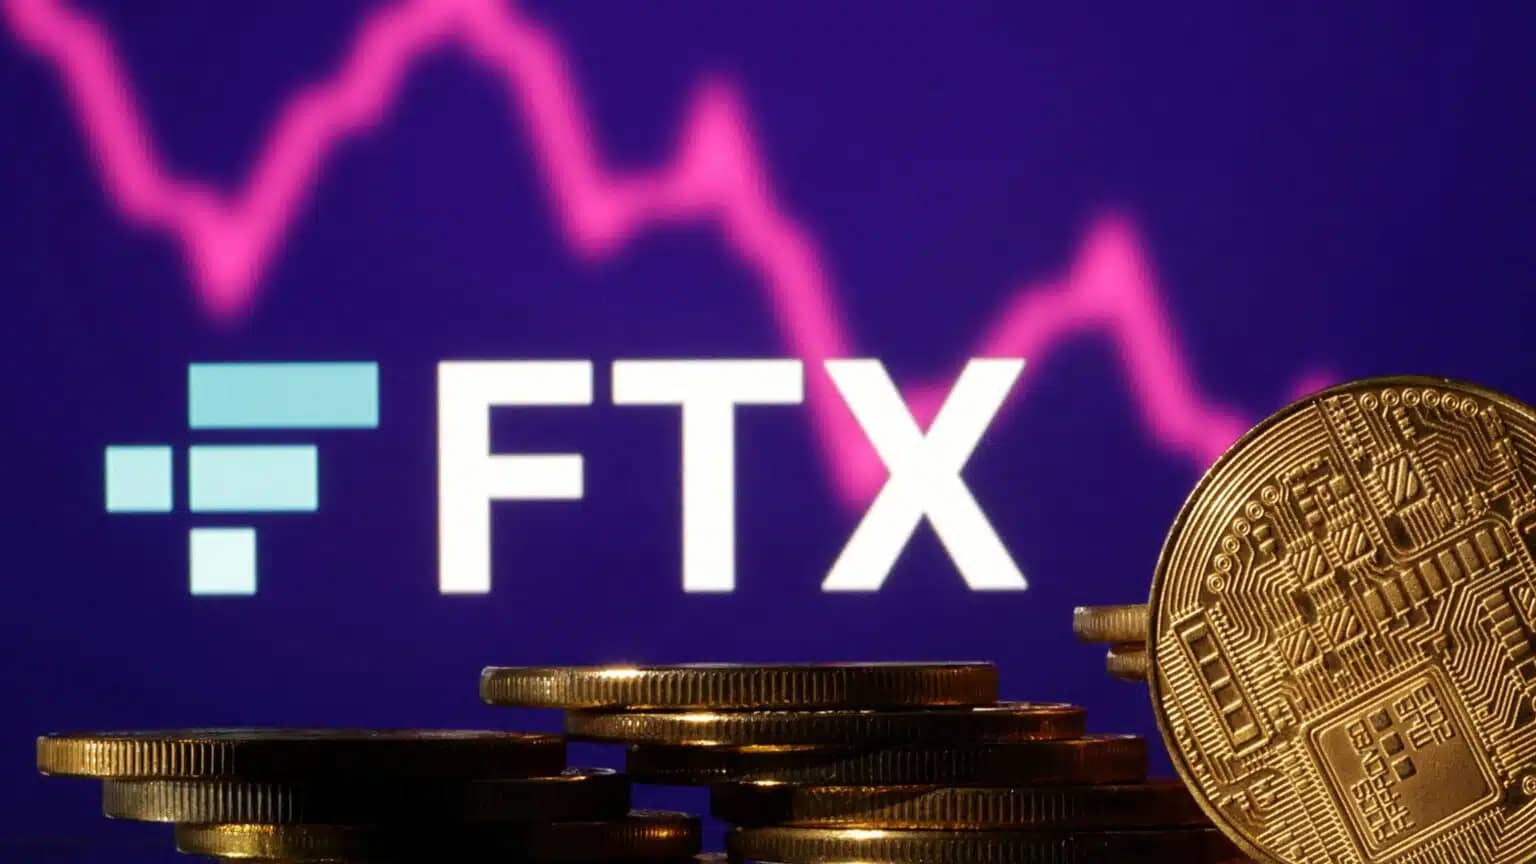 Hackers, who had stolen about $477 million worth of cryptocurrency from the crashing exchange FTX, have begun laundering that money into bitcoin.